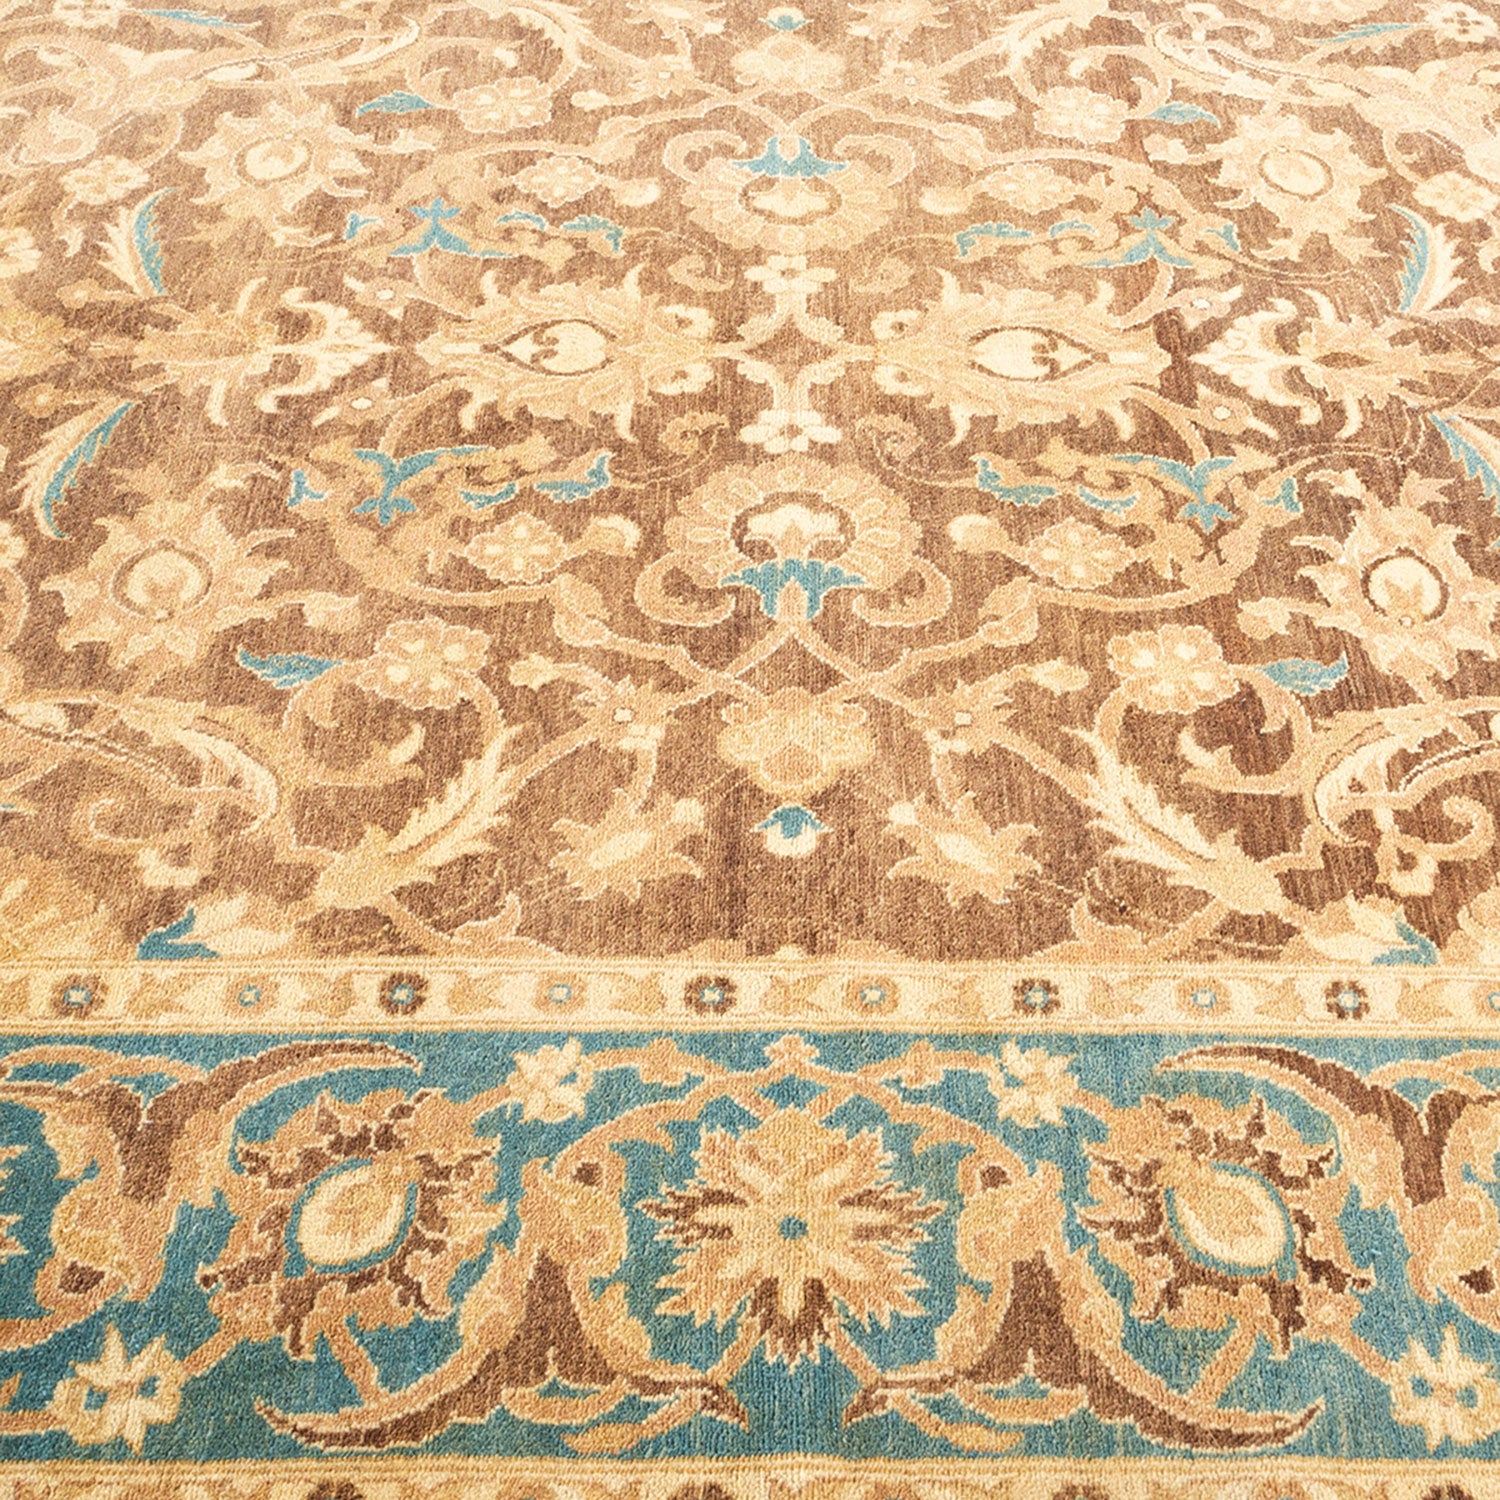 Symmetrical and intricate carpet design with floral motifs and swirls